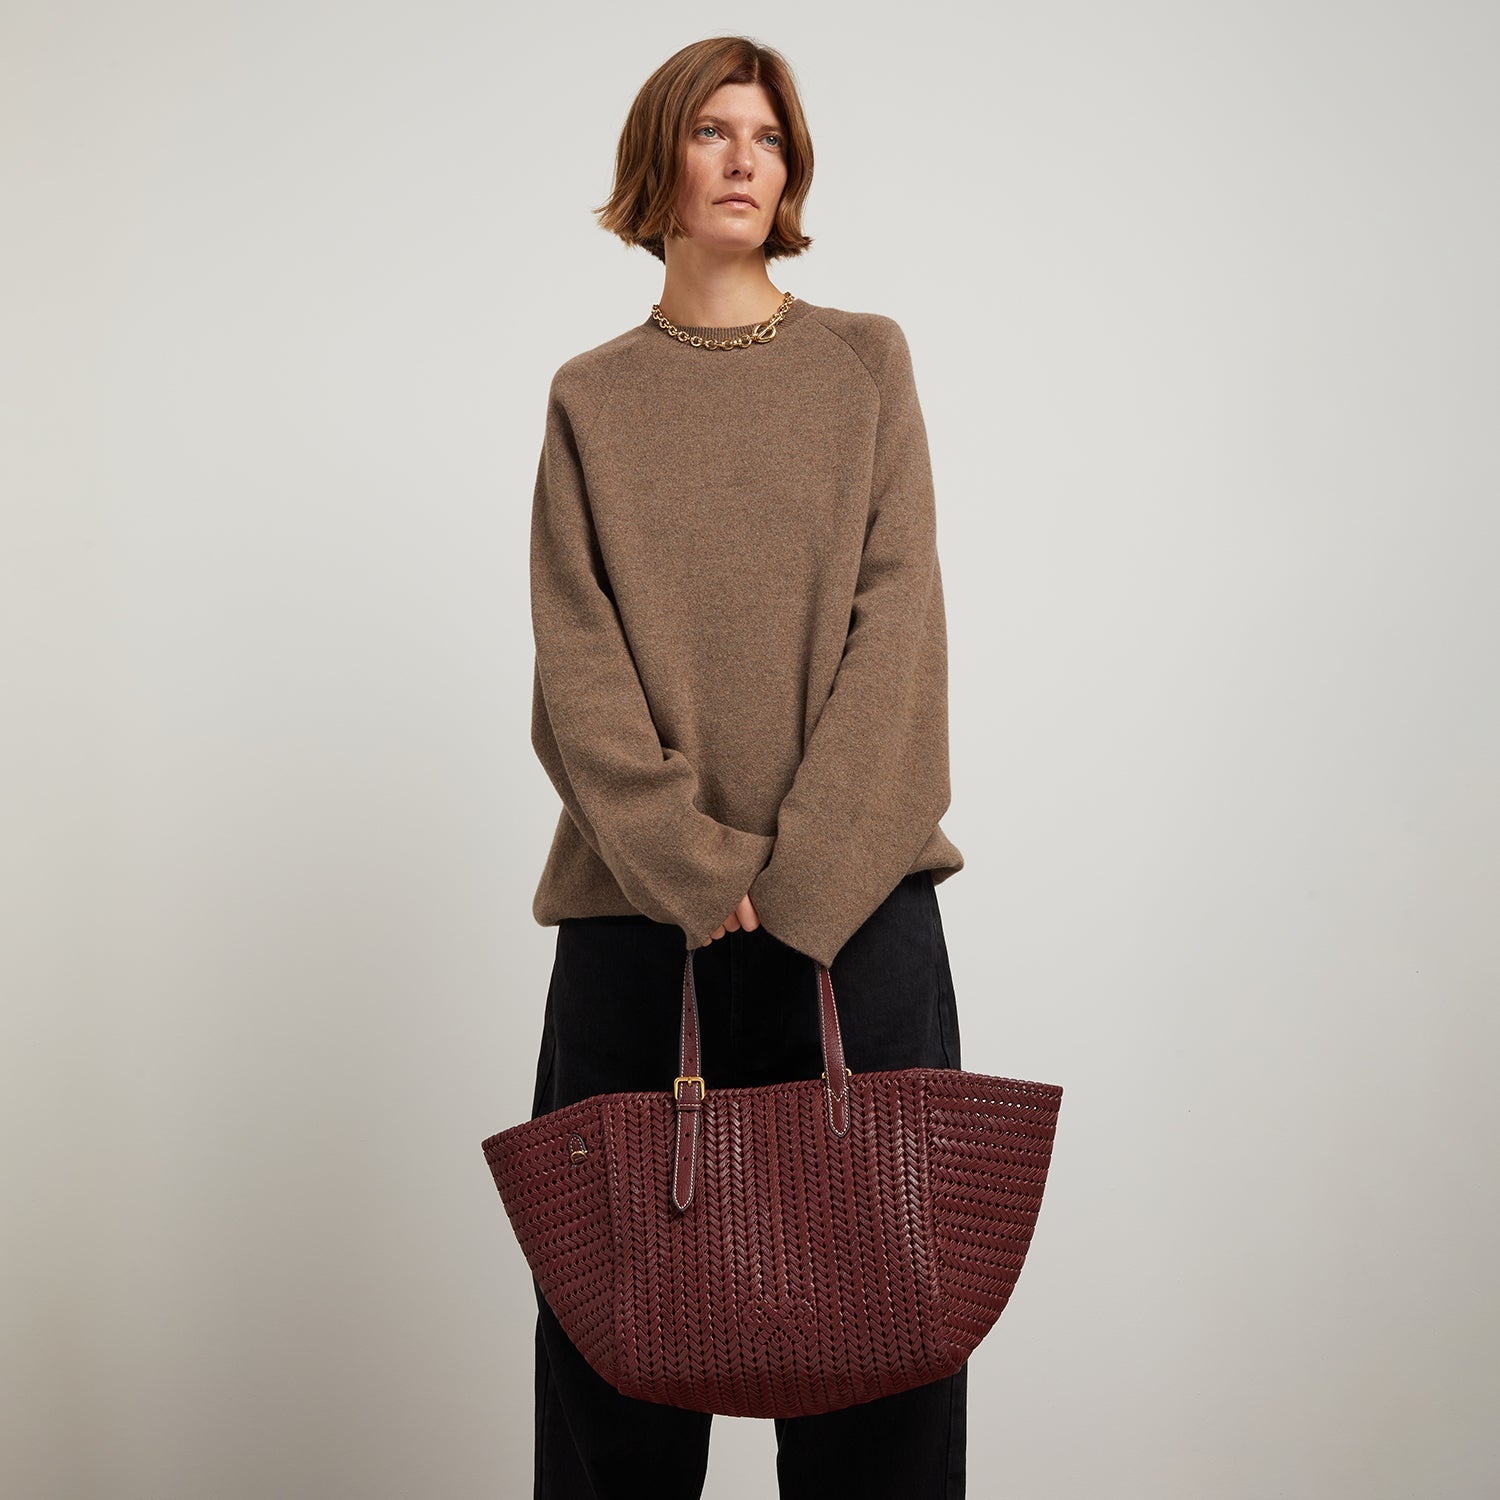 Neeson Square Tote -

                  
                    Capra Leather in Rosewood -
                  

                  Anya Hindmarch EU
